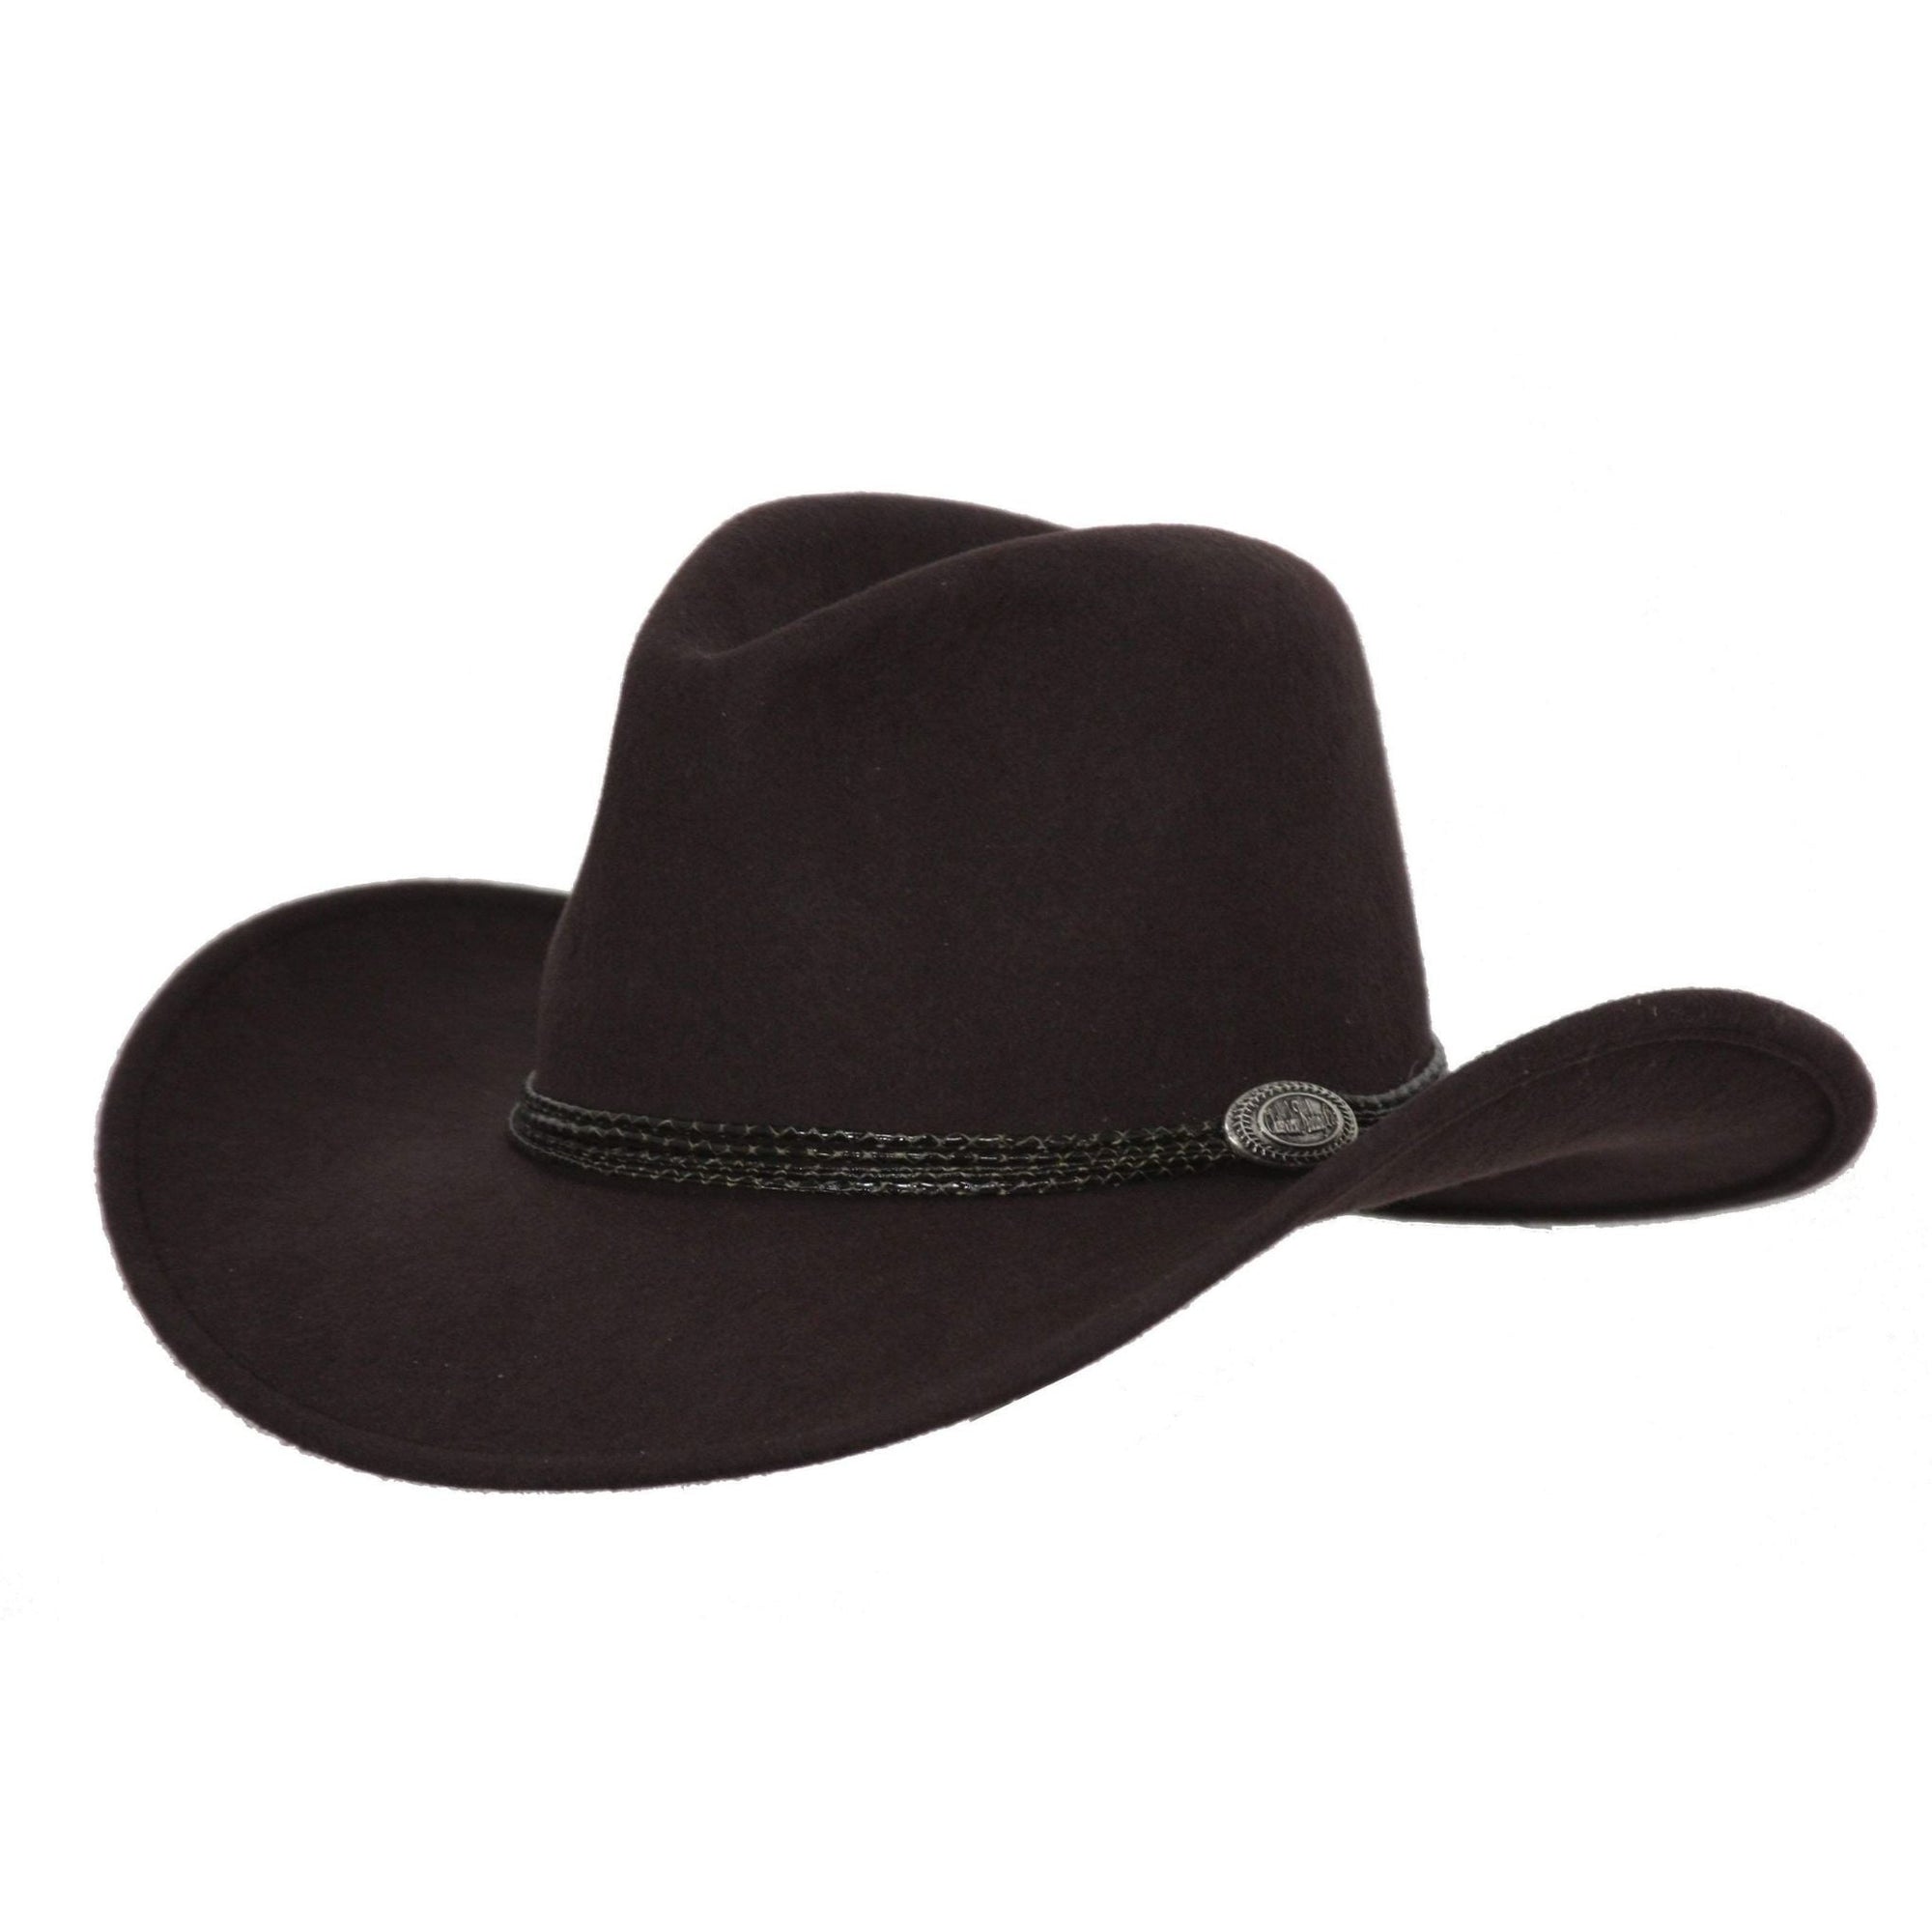 Dark brown western hat with a black plaited leather band and a small silver badge on the left side